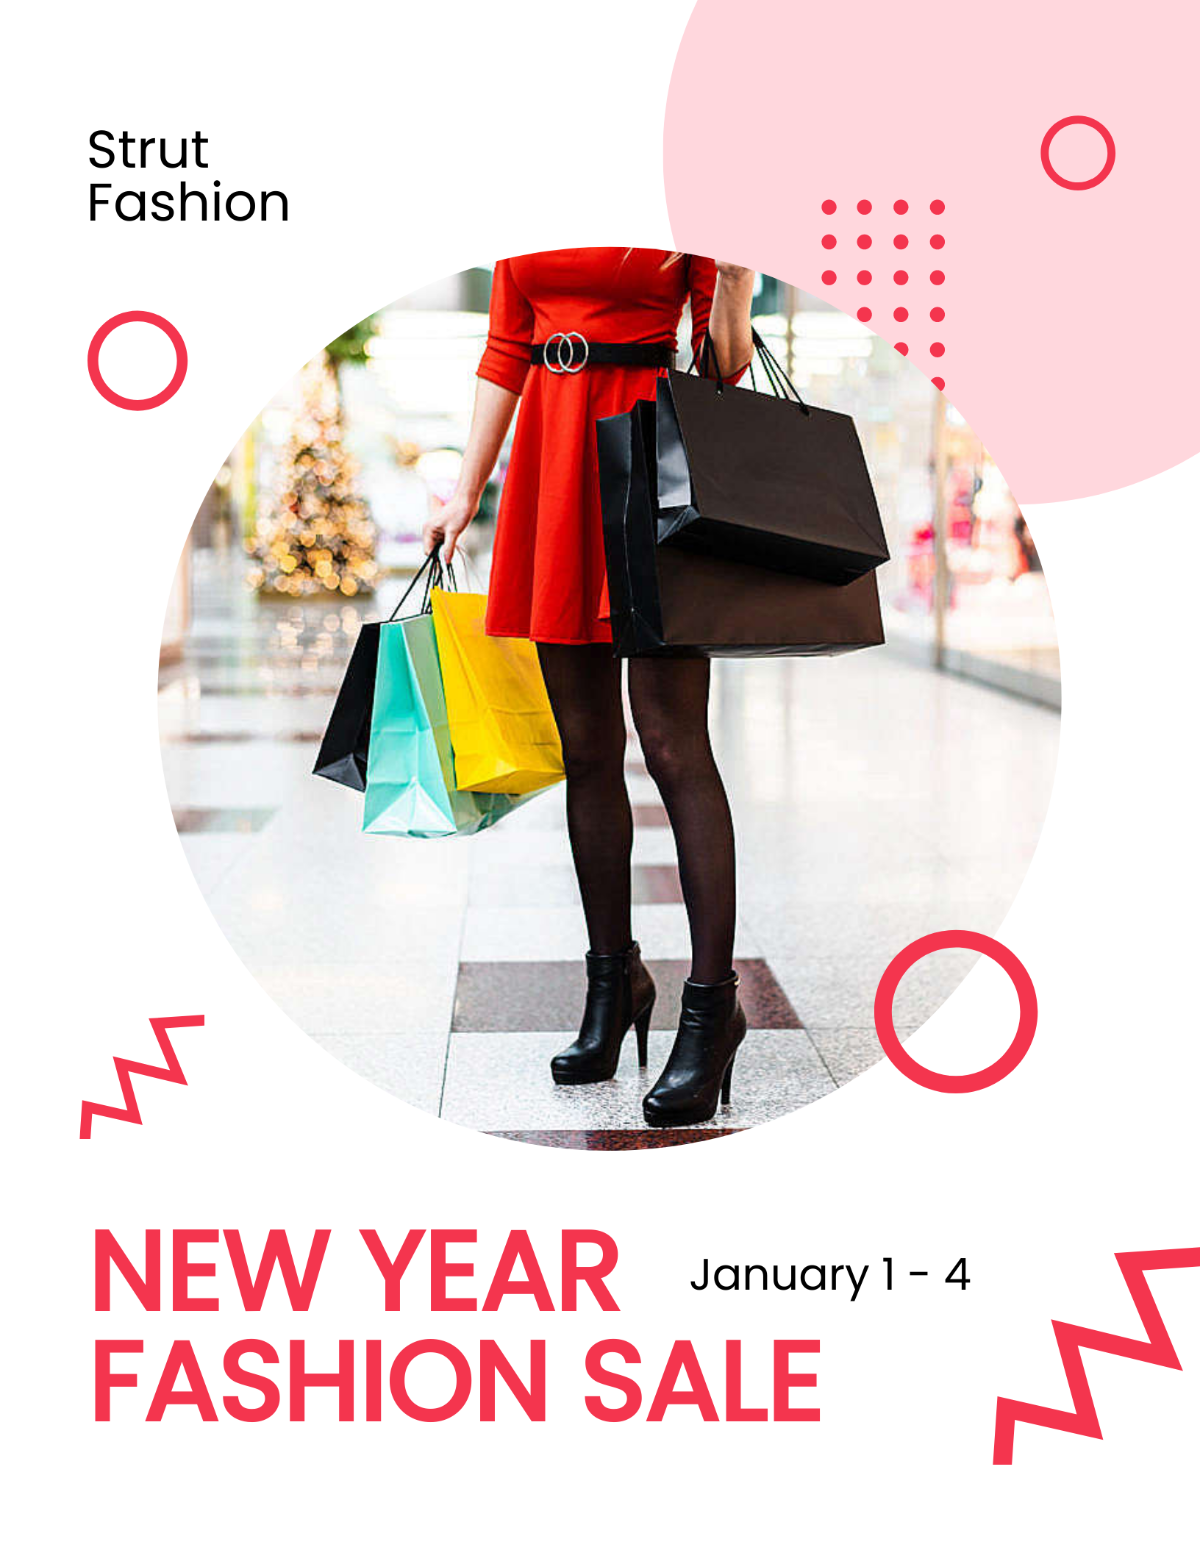 New Year Fashion Sale Promotion Flyer Template